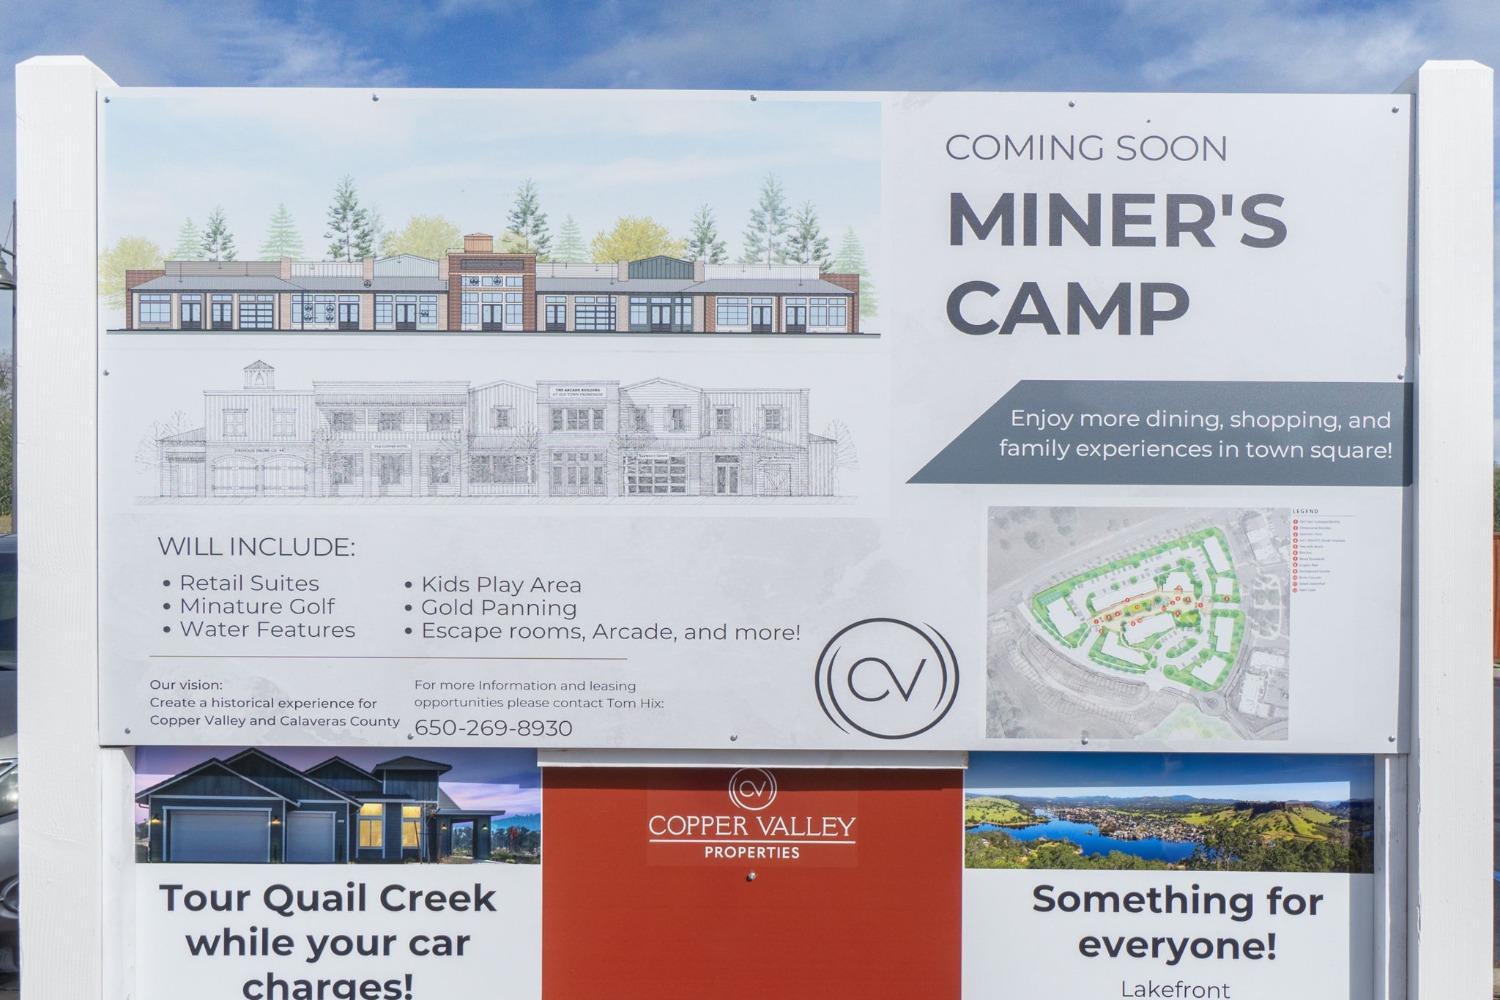 Coming Soon at Copper Square "Miner's Camp"